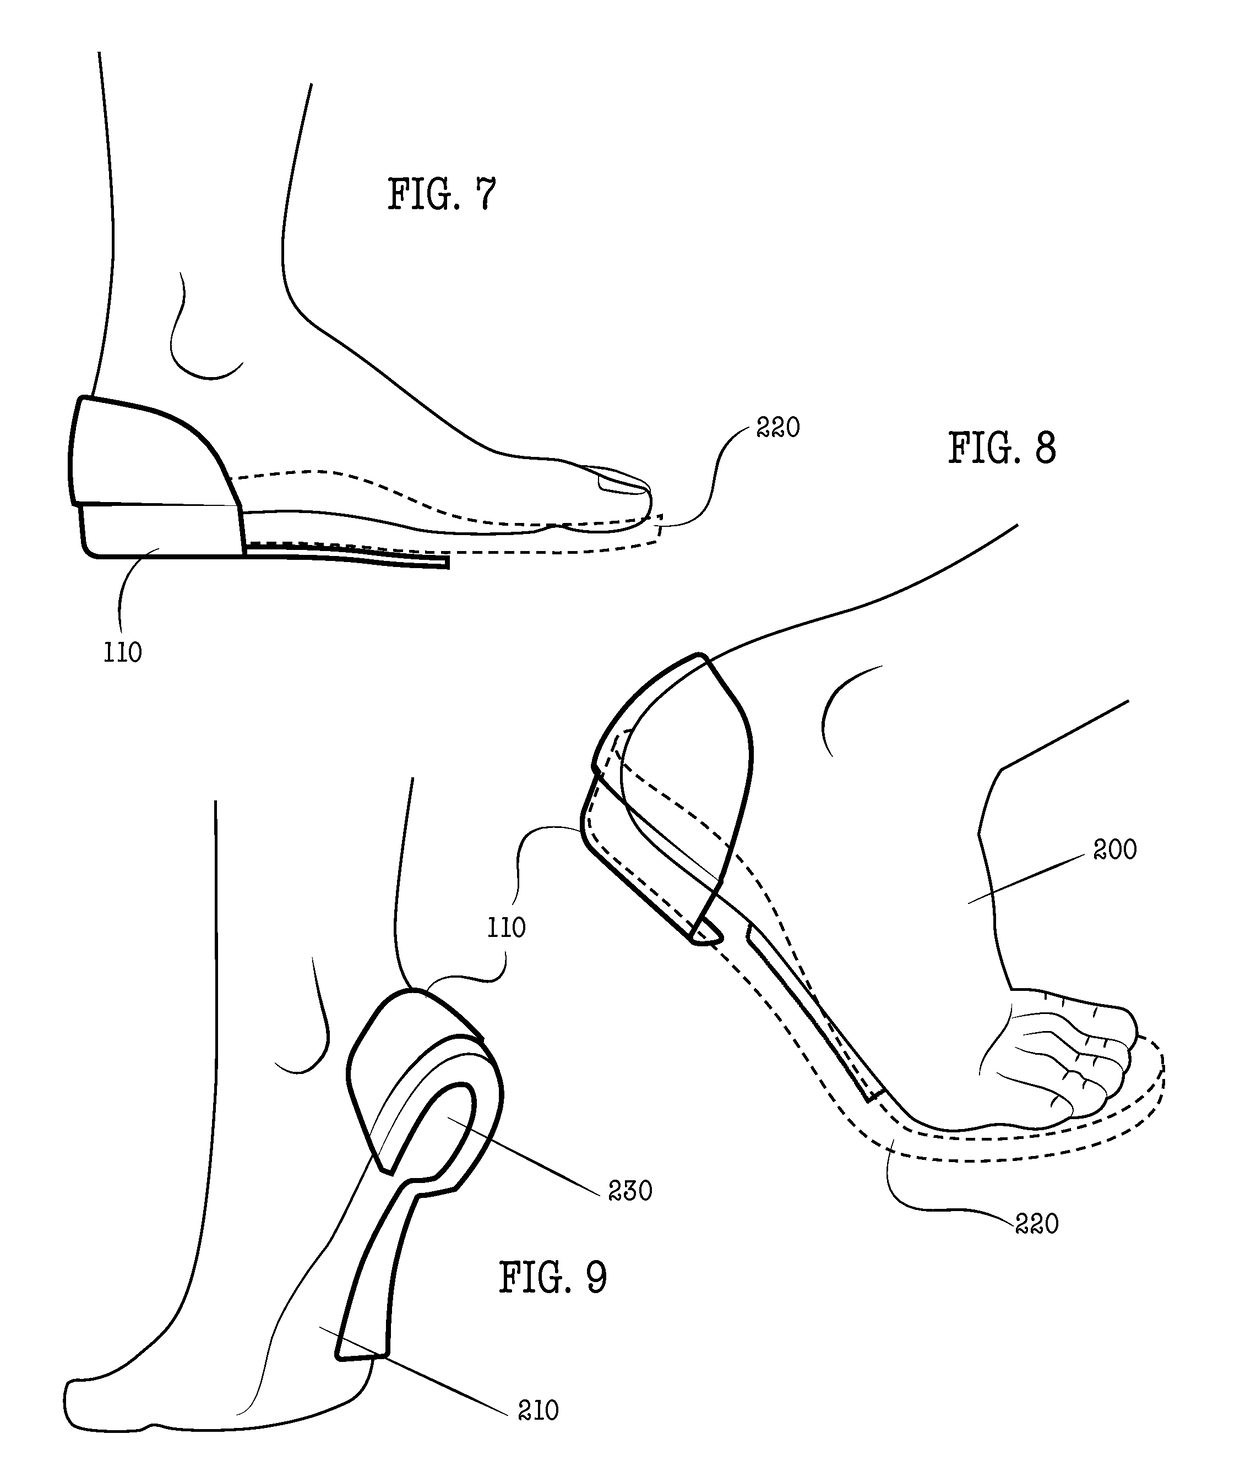 Integrated shoe support structure combining heel counter and shank